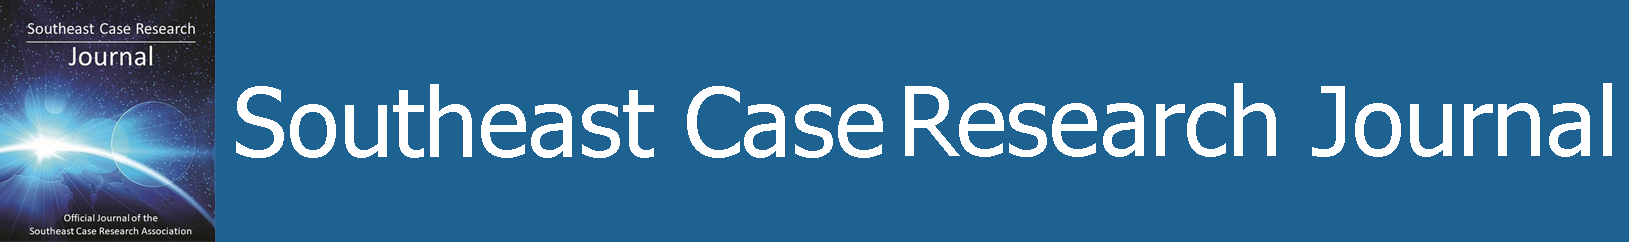 Southeast Case Research Journal